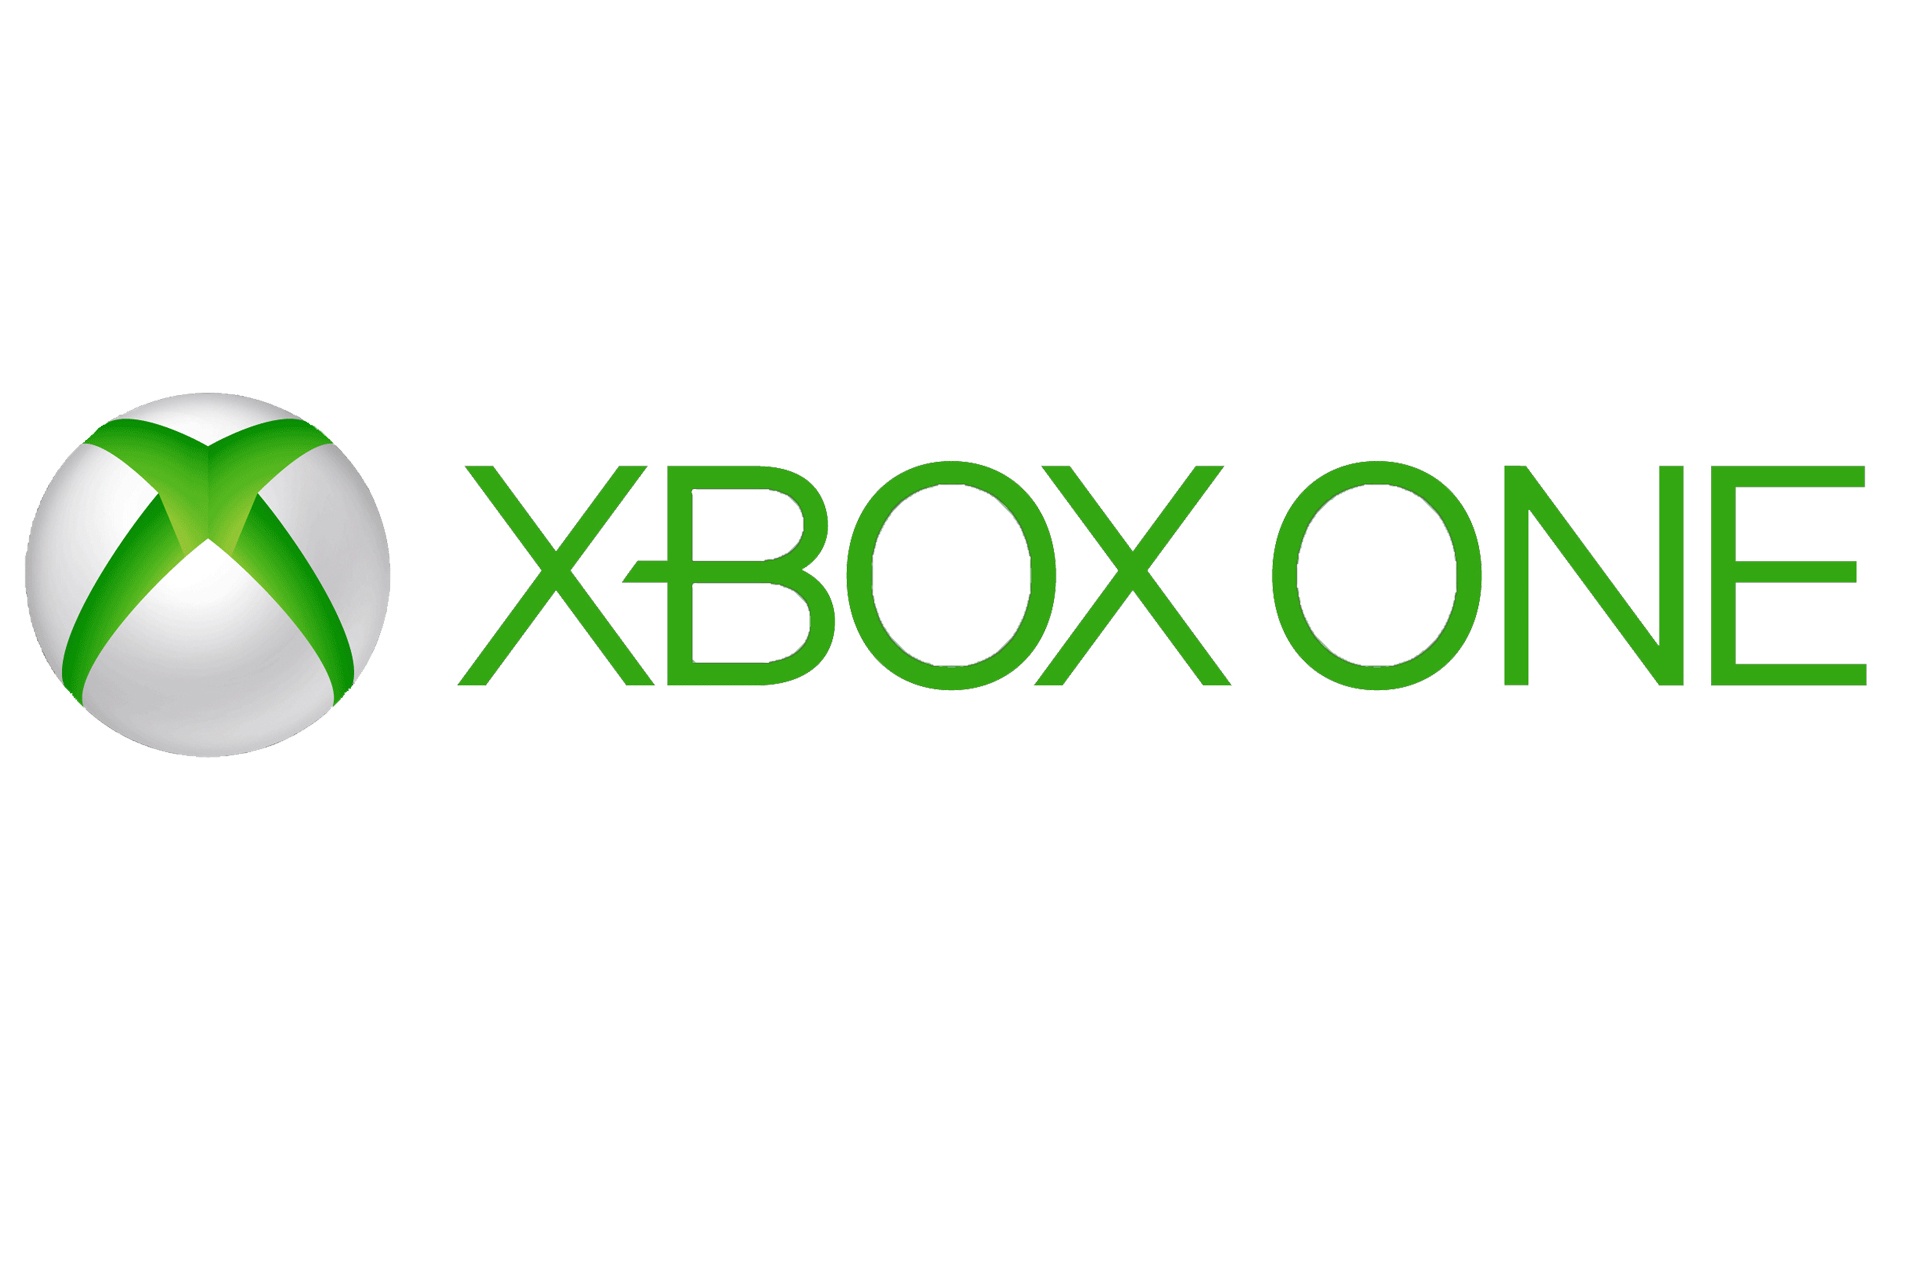 Xbox One Update Makes the Console More Cord Cutting Friendly